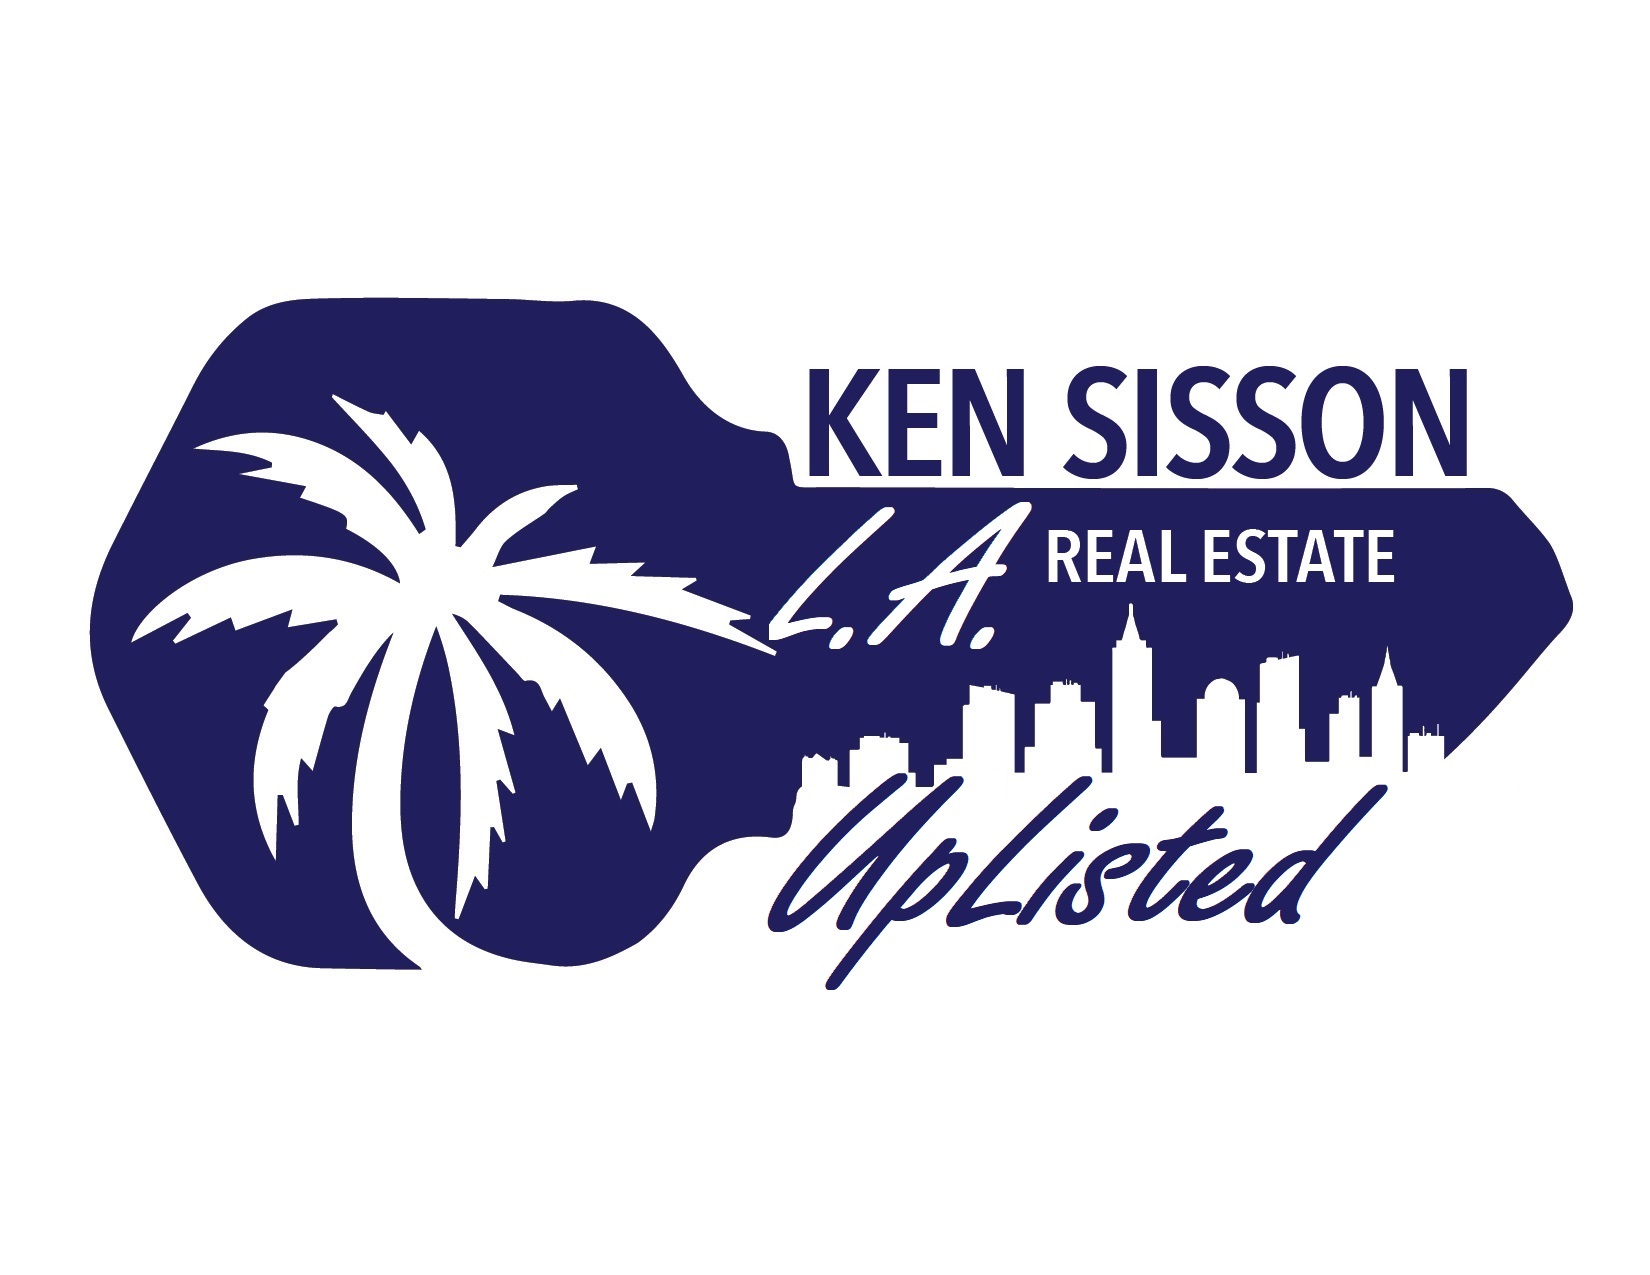 Ken Sisson - Coldwell Banker Realty review